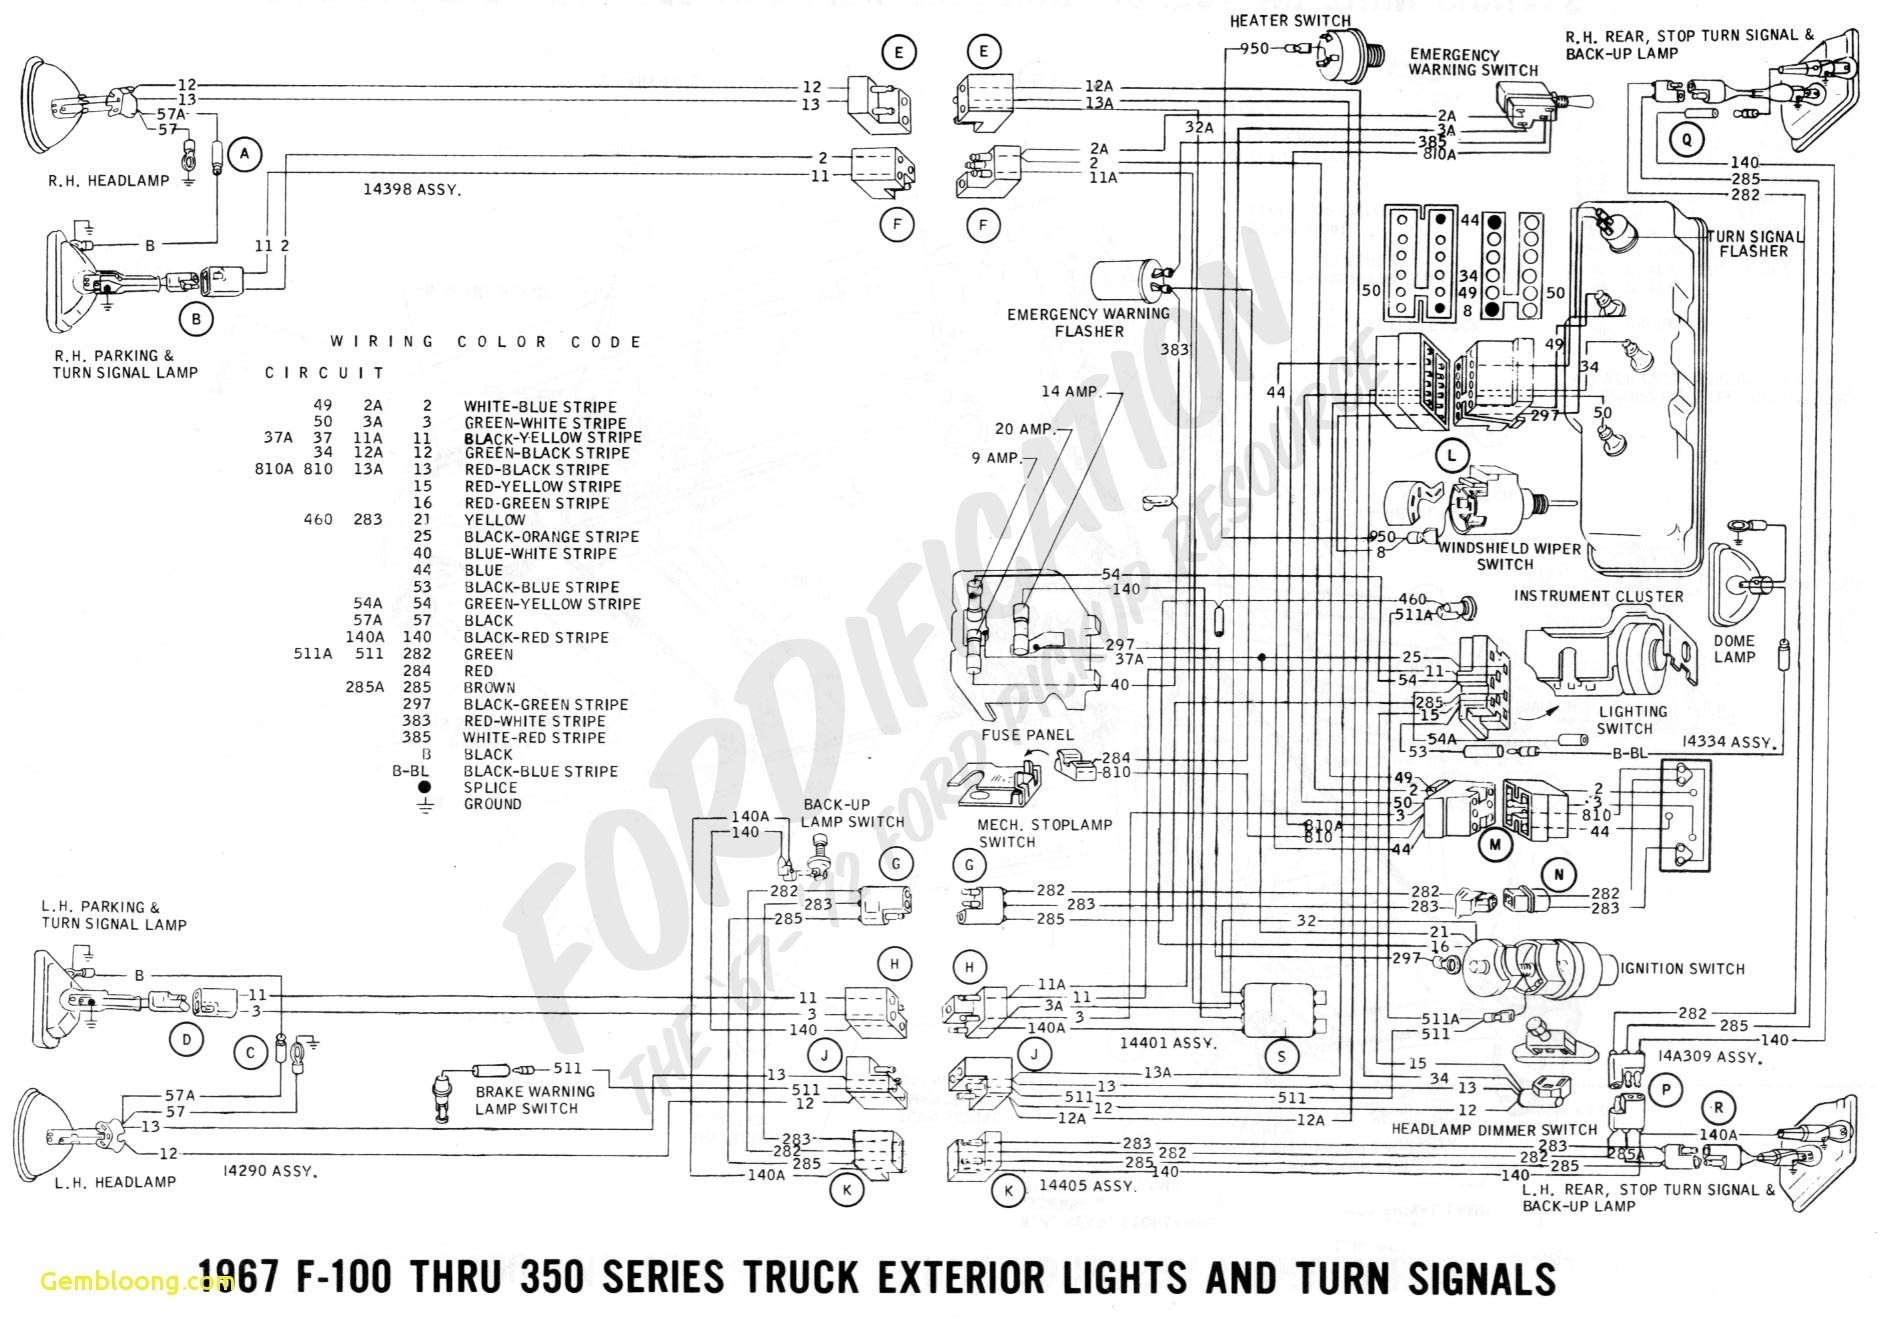 Ford 4 6 Engine Diagram Wiring Diagram 3 Way Switch Guitar Starter Motor solenoid Simplicity Of Ford 4 6 Engine Diagram